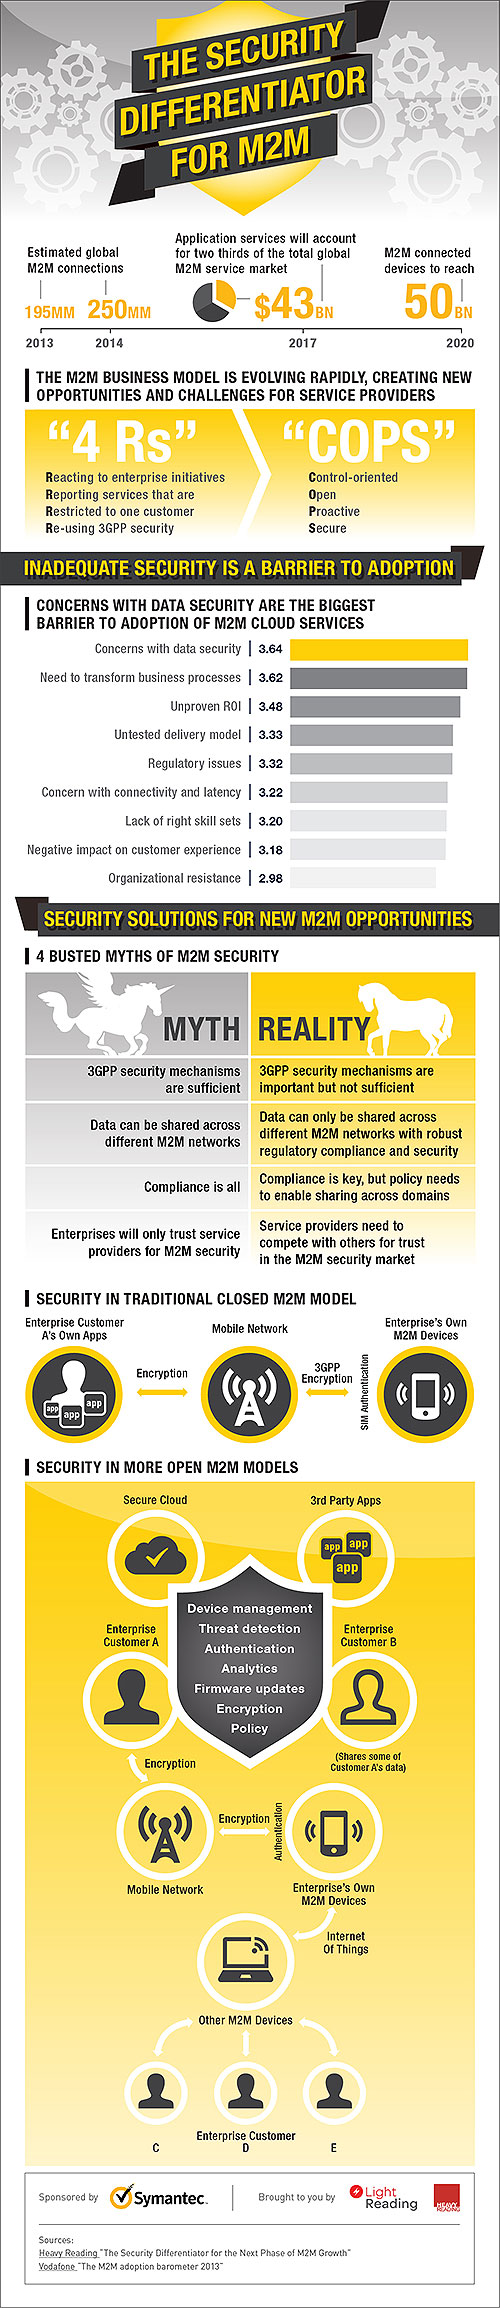 A New Security Paradigm For a New Era Of M2M Apps | Light Reading